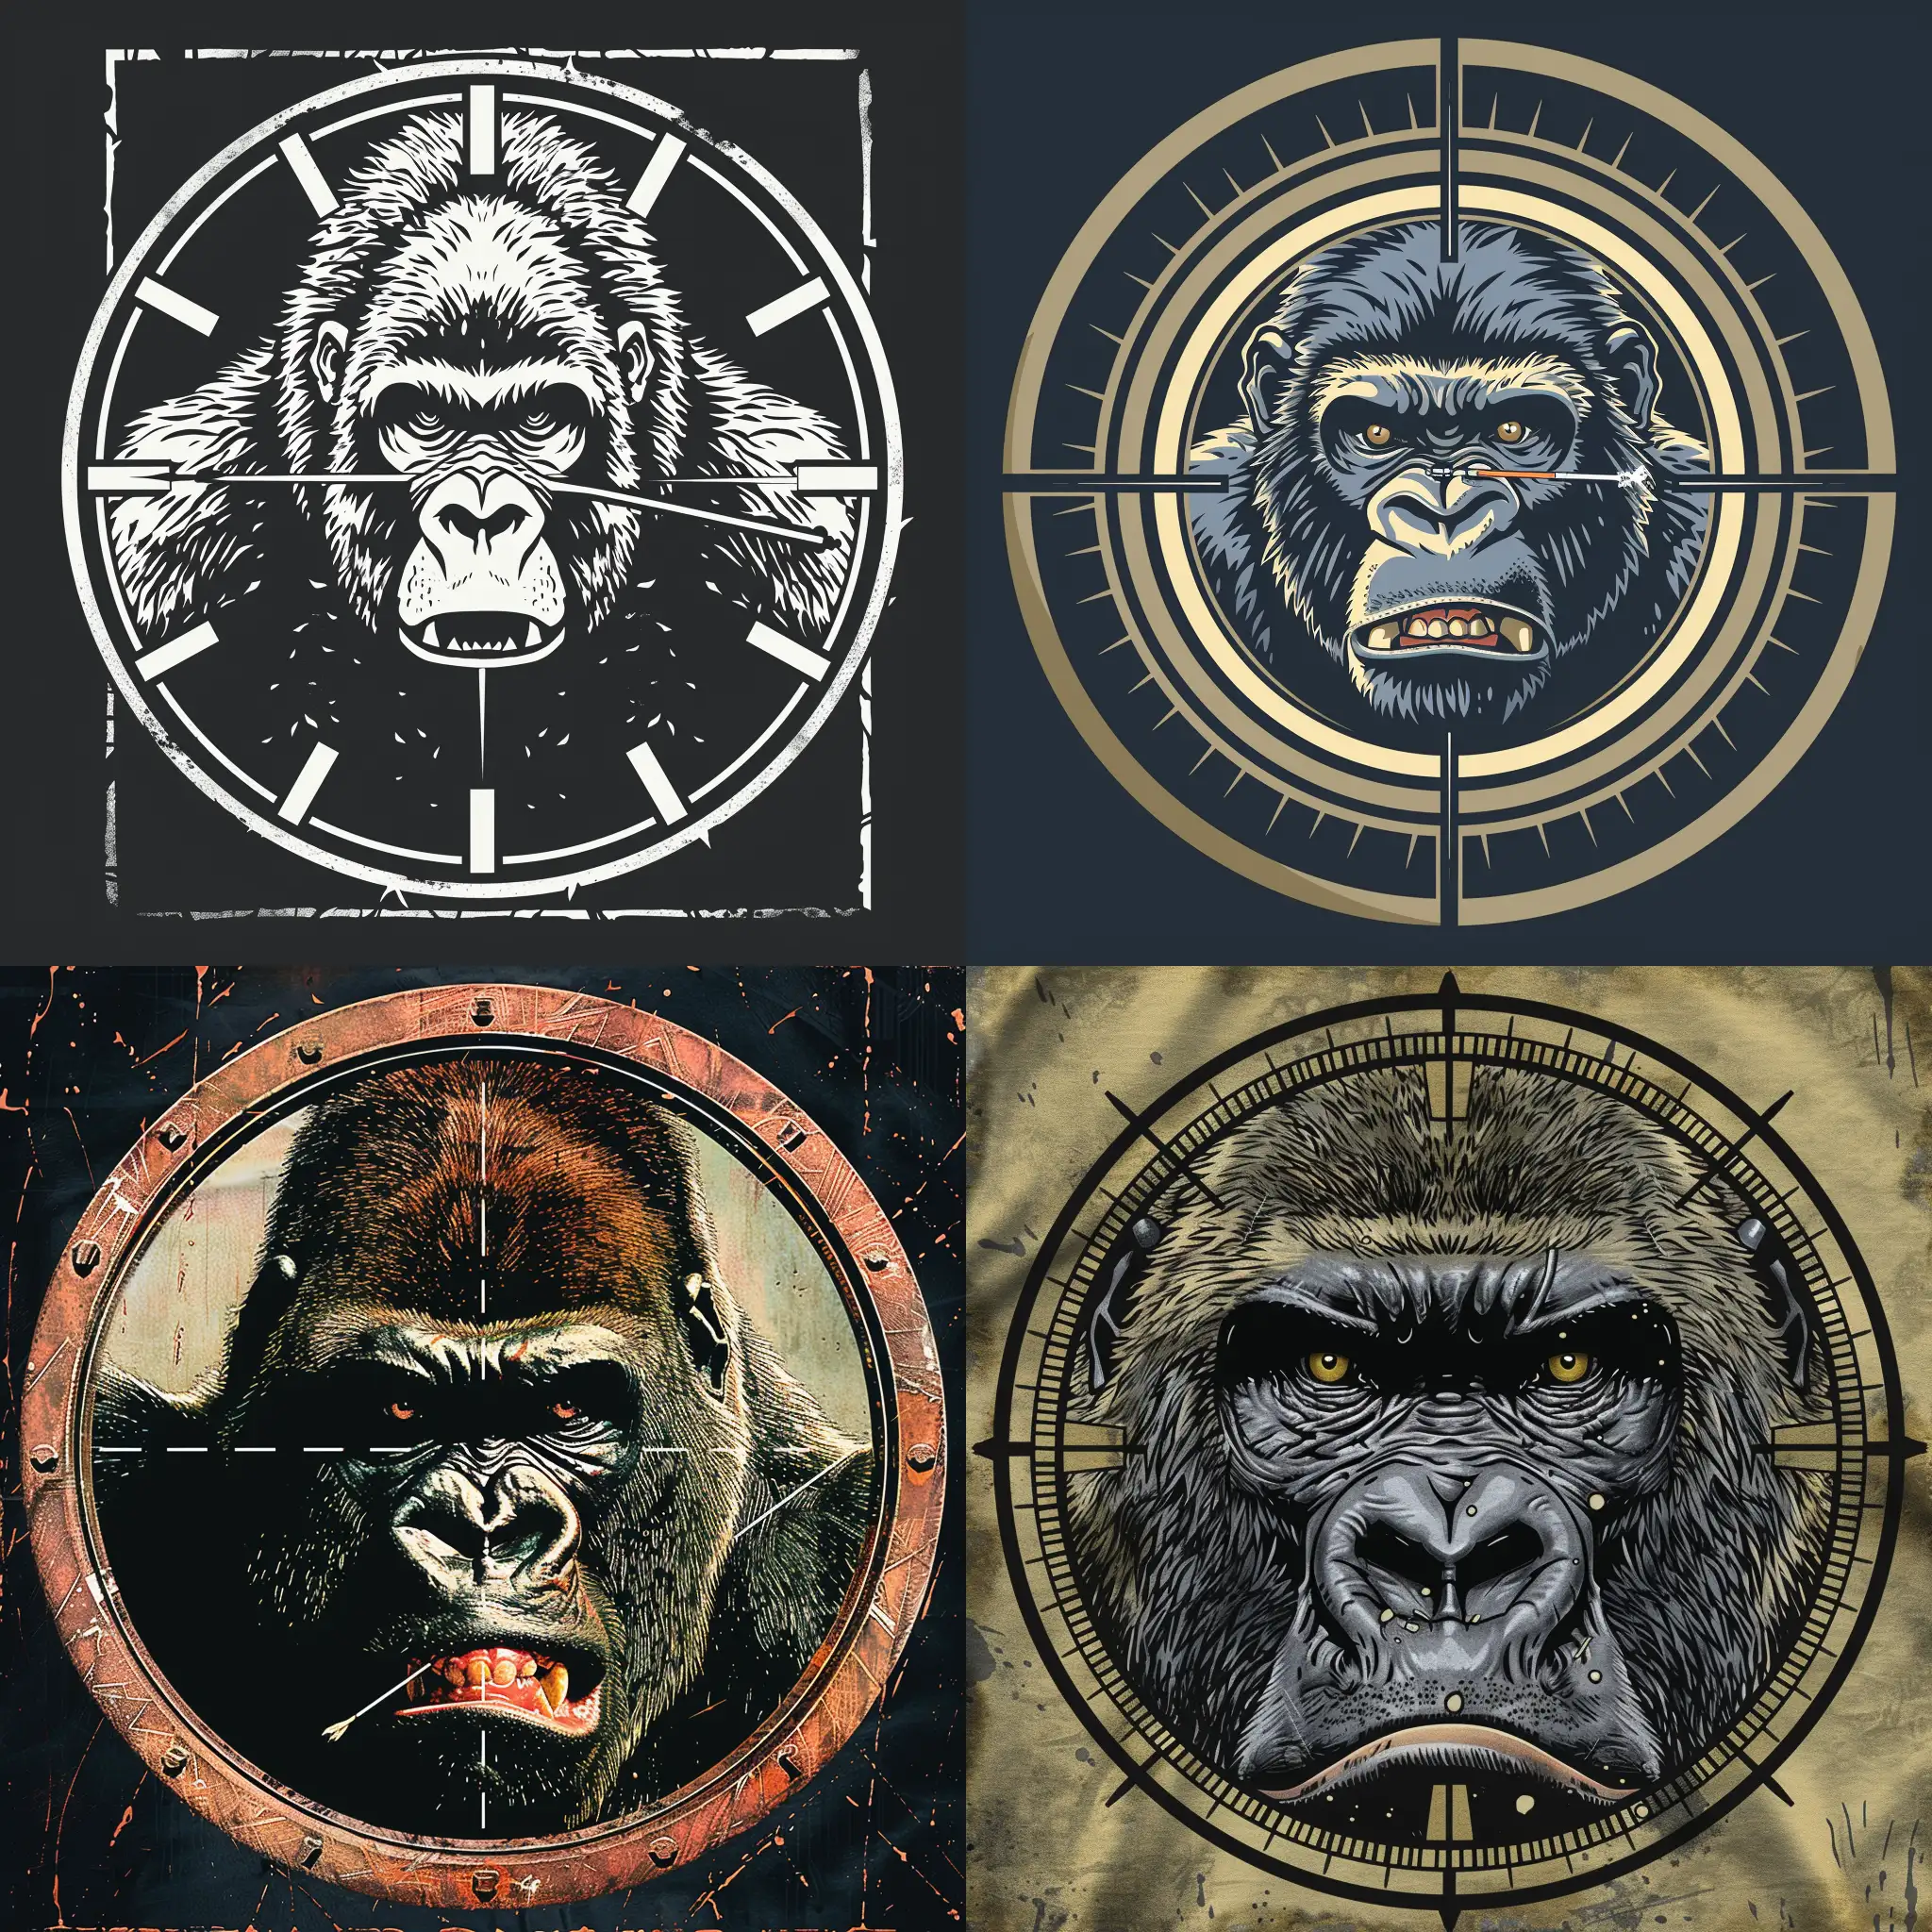 Looking down the crosshairs at an angry gorilla who has just been shot with a tranquilizer dart for tshirt design